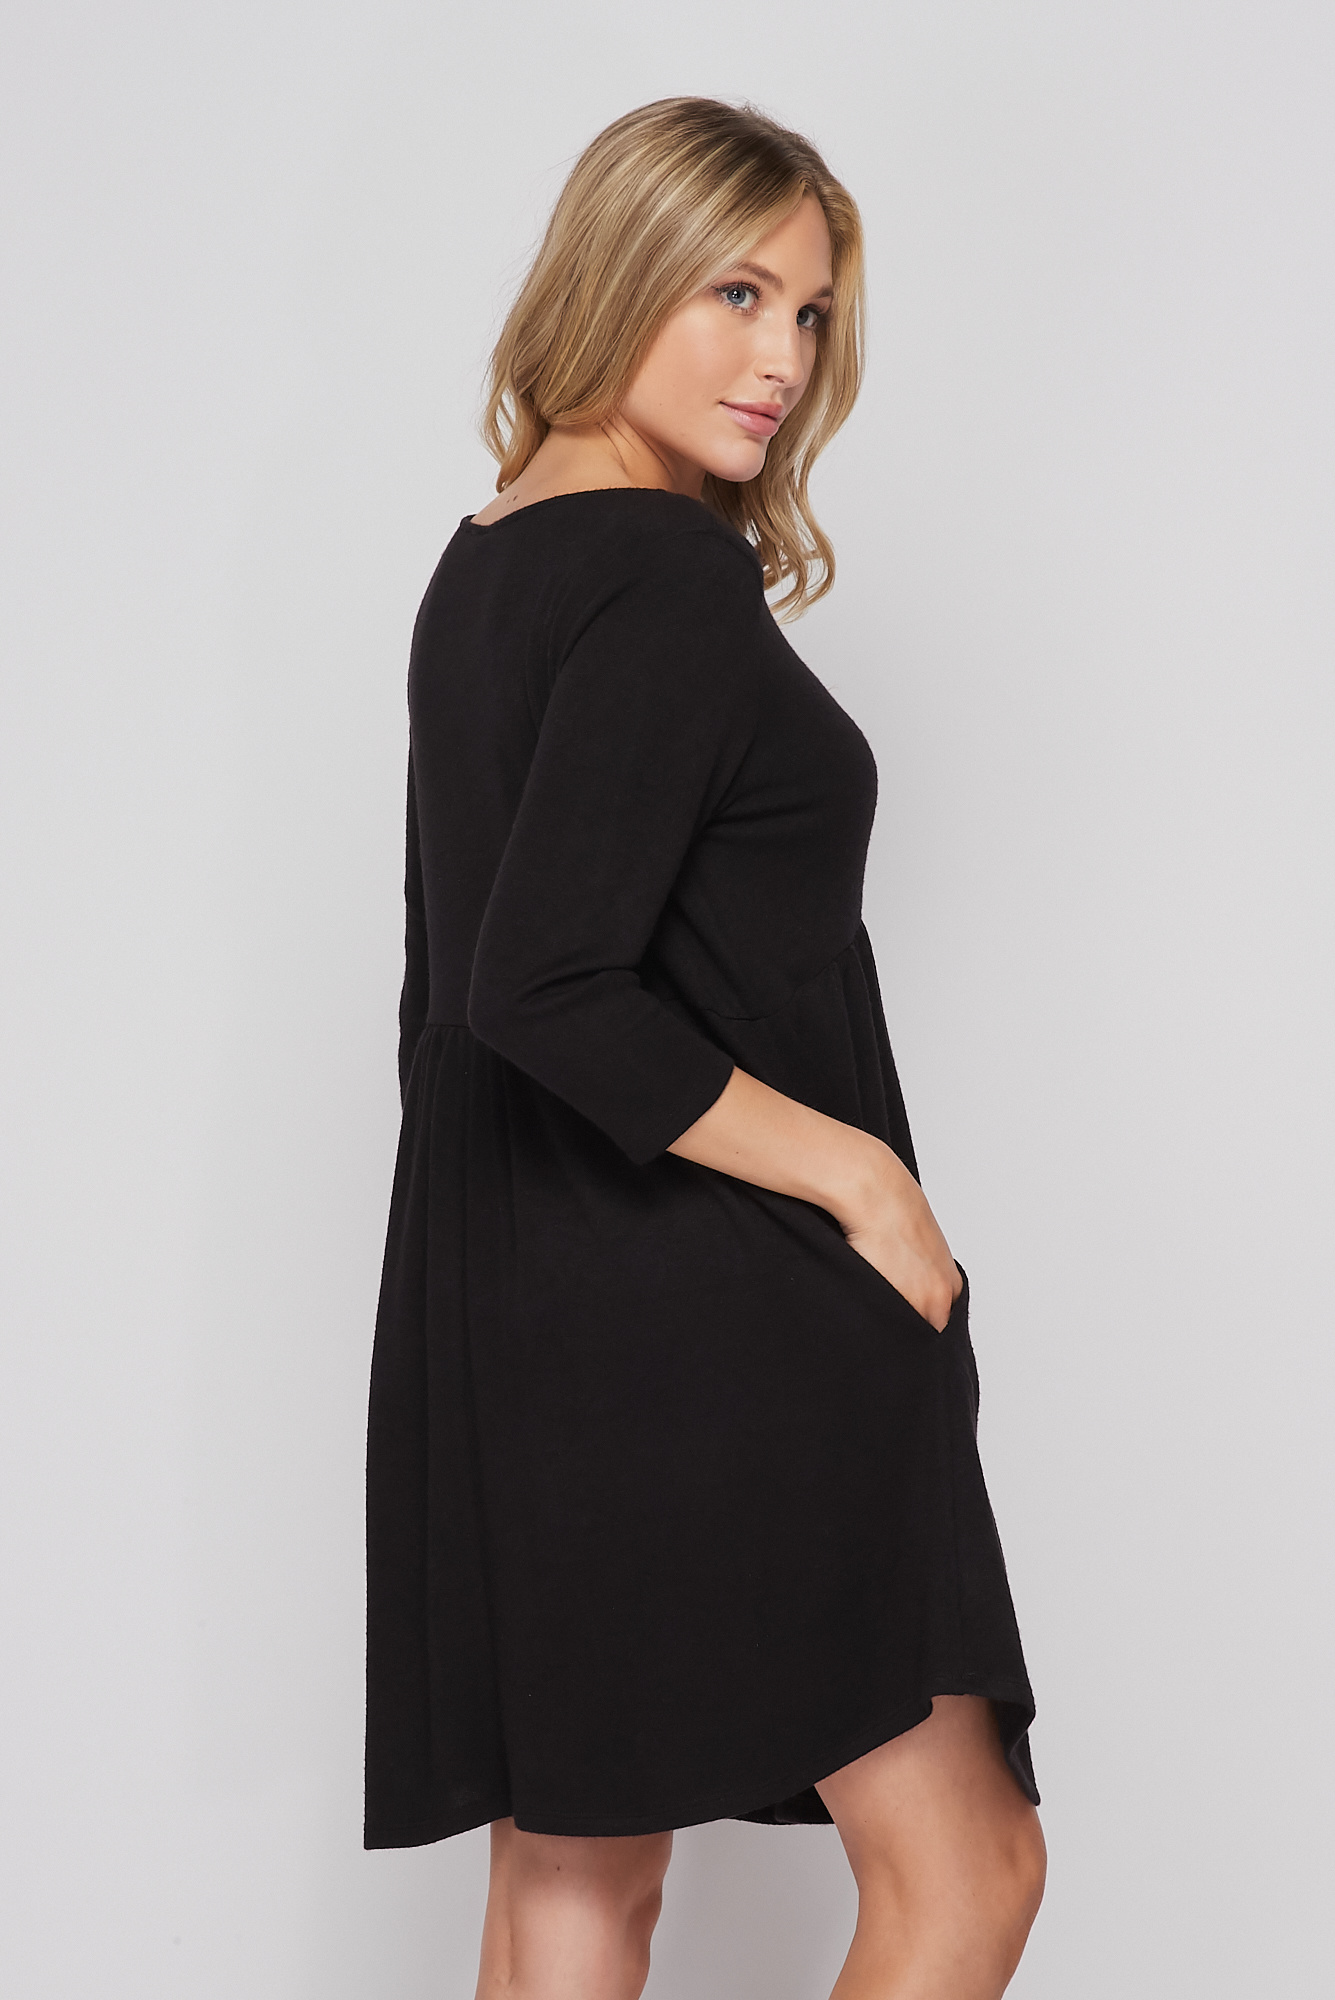 Solid Dress With Pockets - King Frog Clothing & The LilyPad Boutique